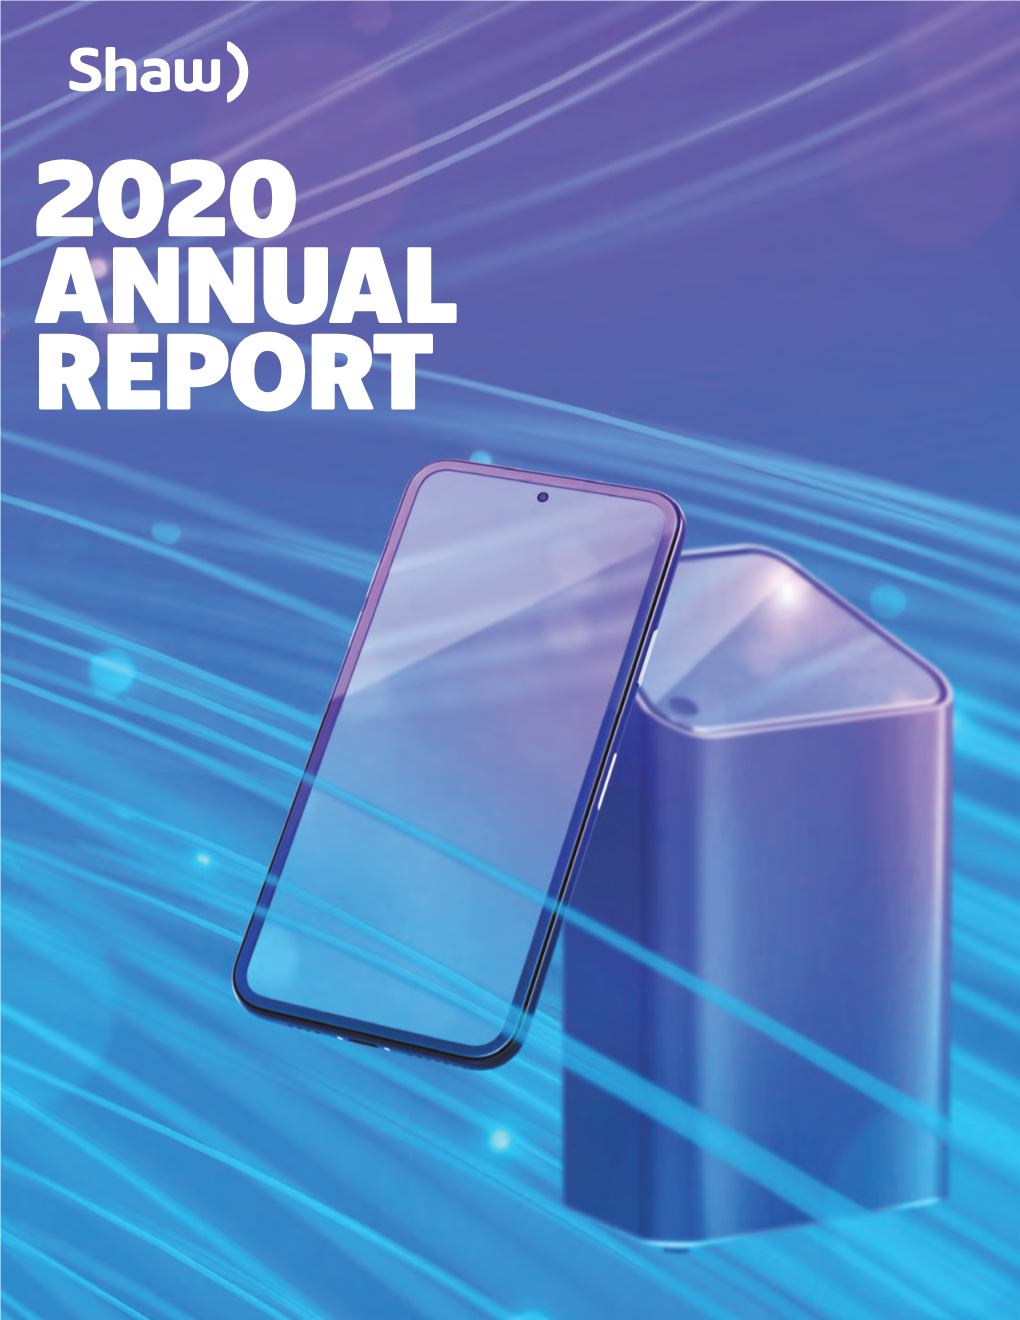 2020 Annual Report Contents